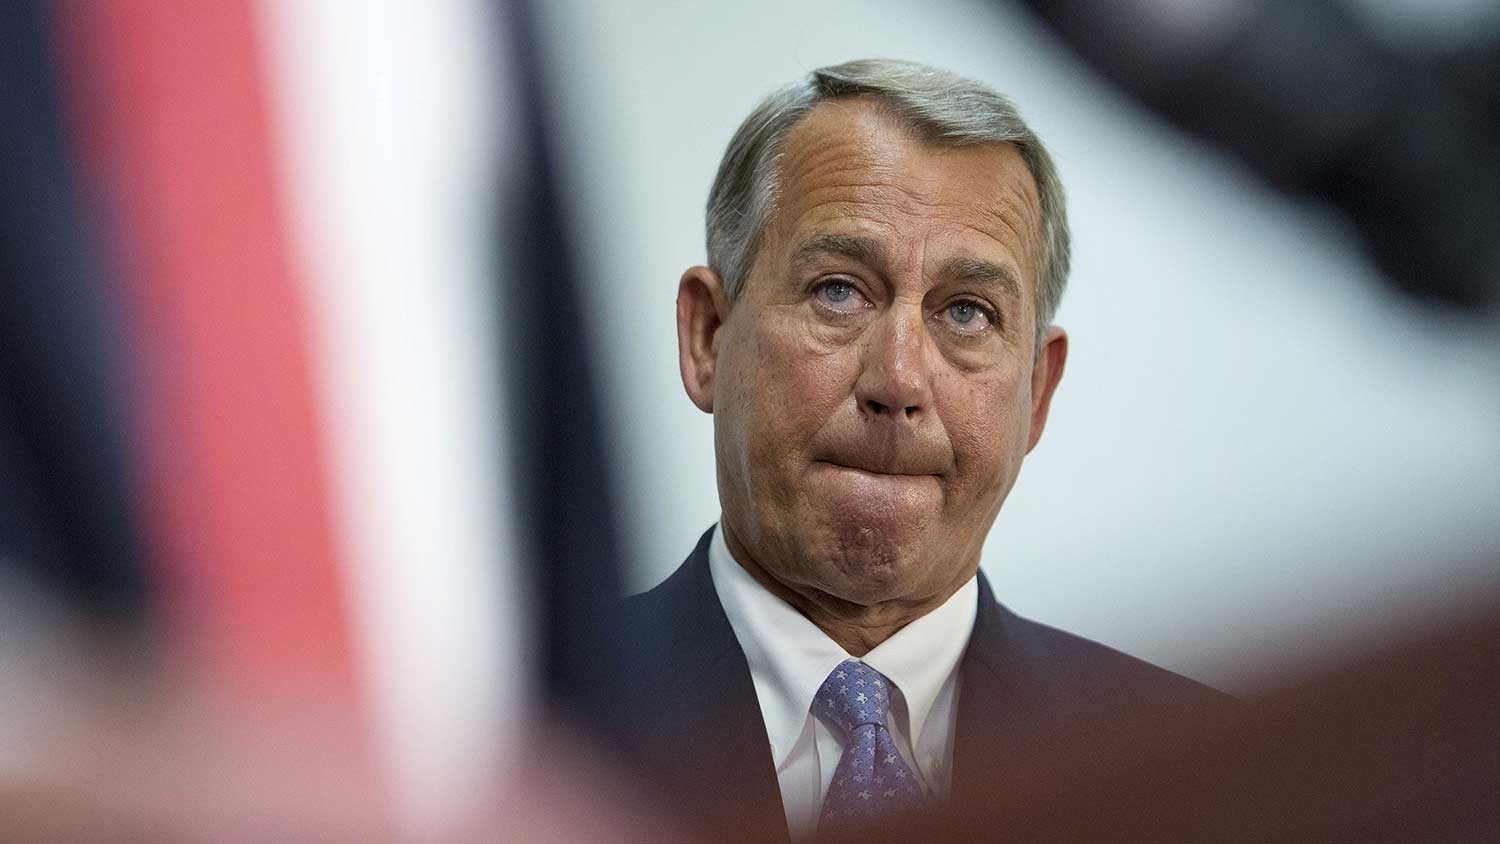 U.S. House Speaker John Boehner, a Republican from Ohio, listens during a news conference after a House Republican Conference meeting at the U.S. Capitol Building in Washington, D.C., U.S., on Tuesday, Dec. 2, 2014.
